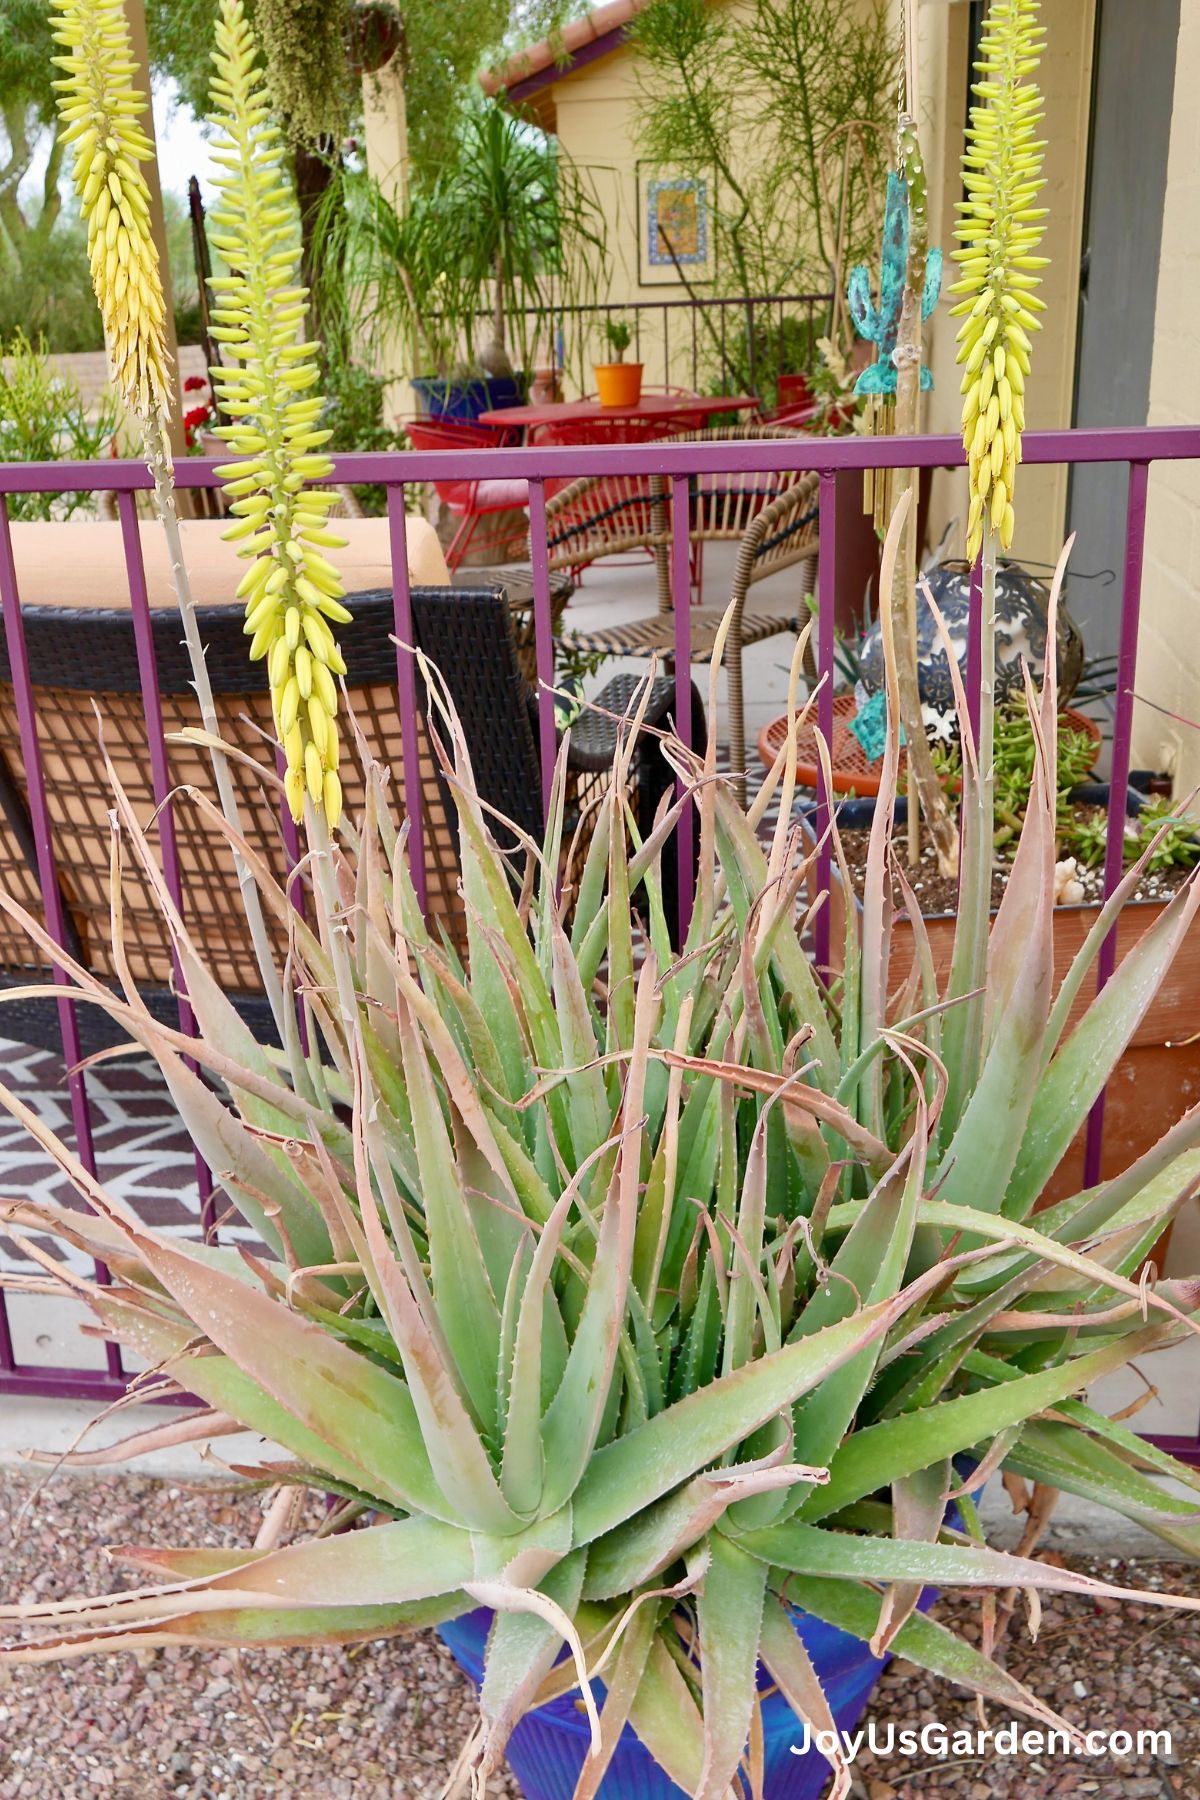 Aloe vera growing outdoors in a bluje pot, plant is in bloom with yellow flower stalks. 